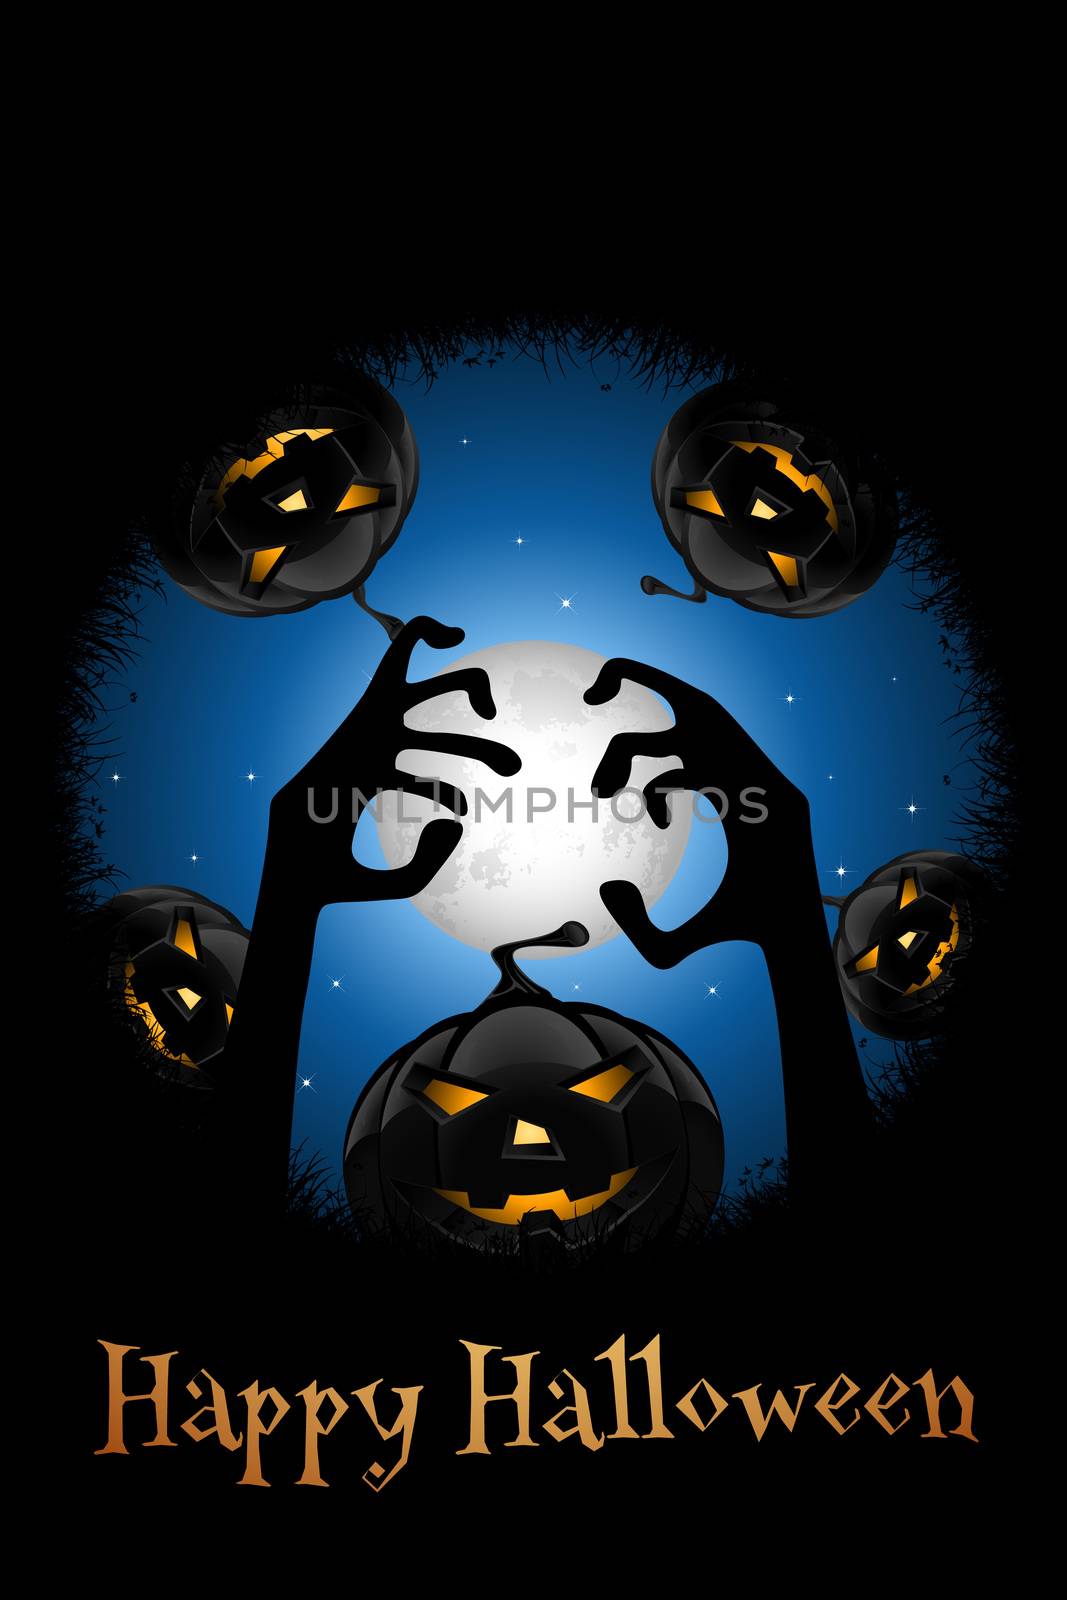 Halloween Zombie Party Poster with Pumpkins and Moon.